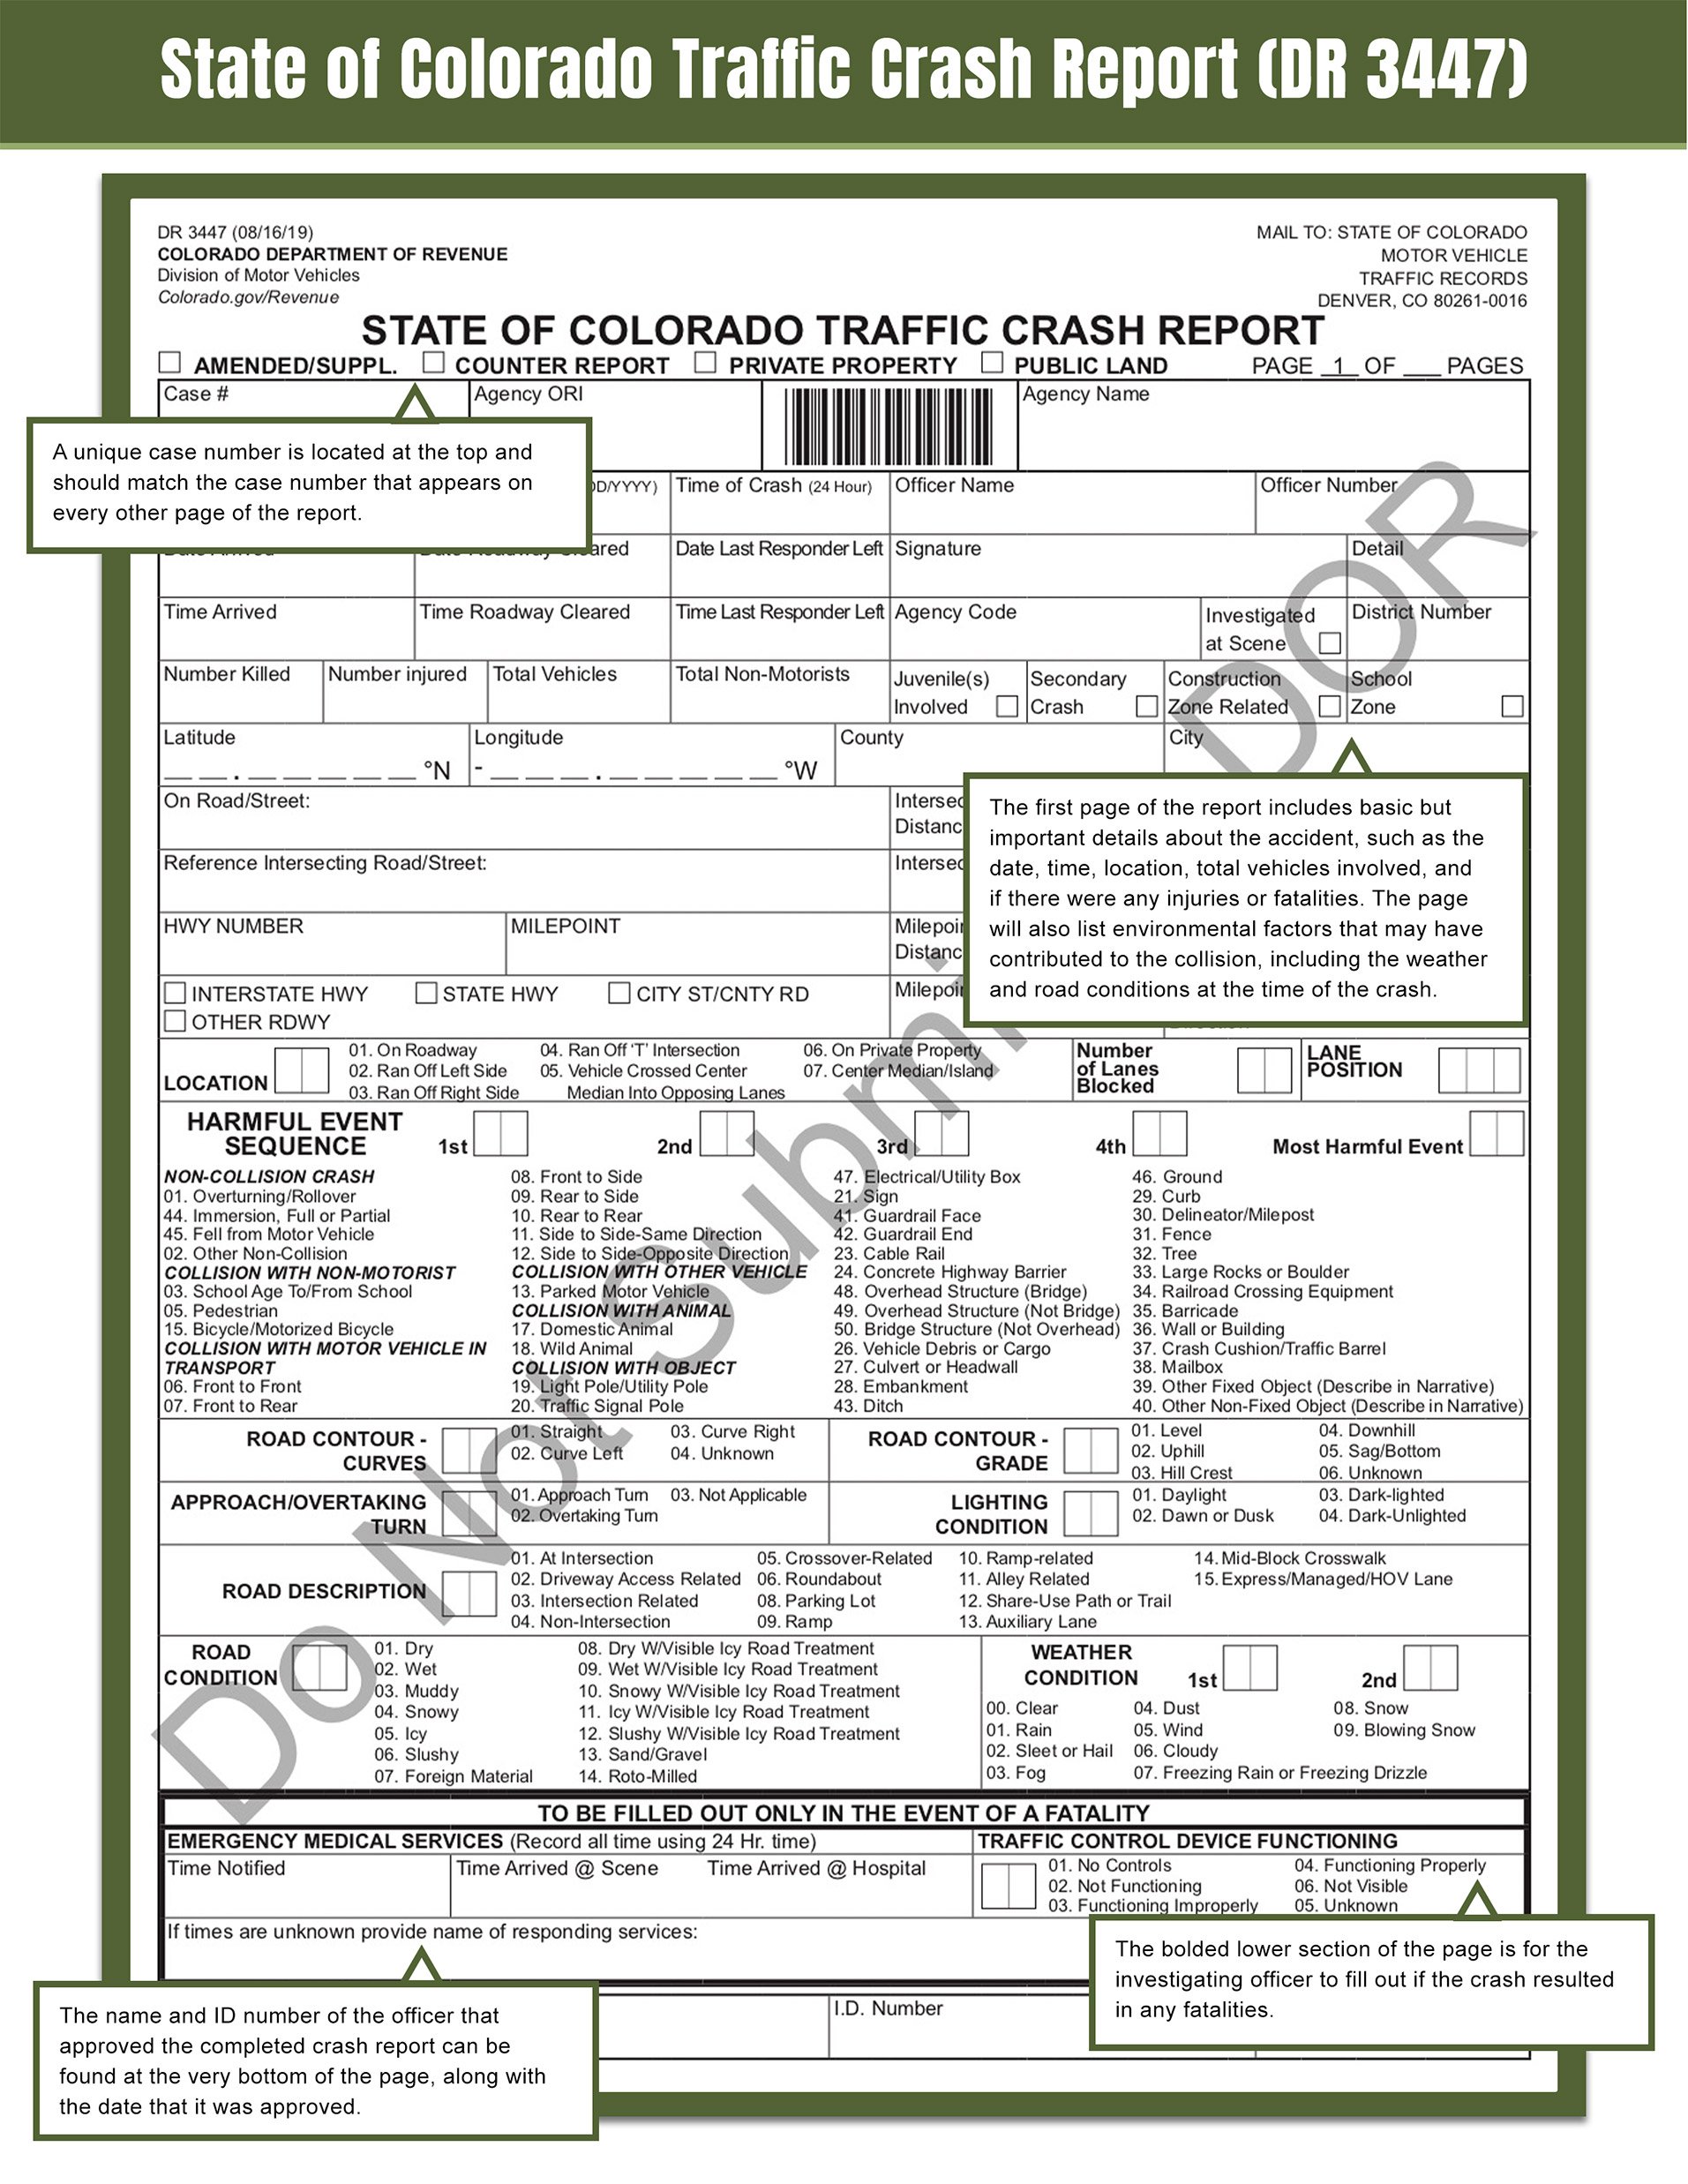 Colorado Car Accident Report | Law.com Lawyerpages | Law.com LawyerPages